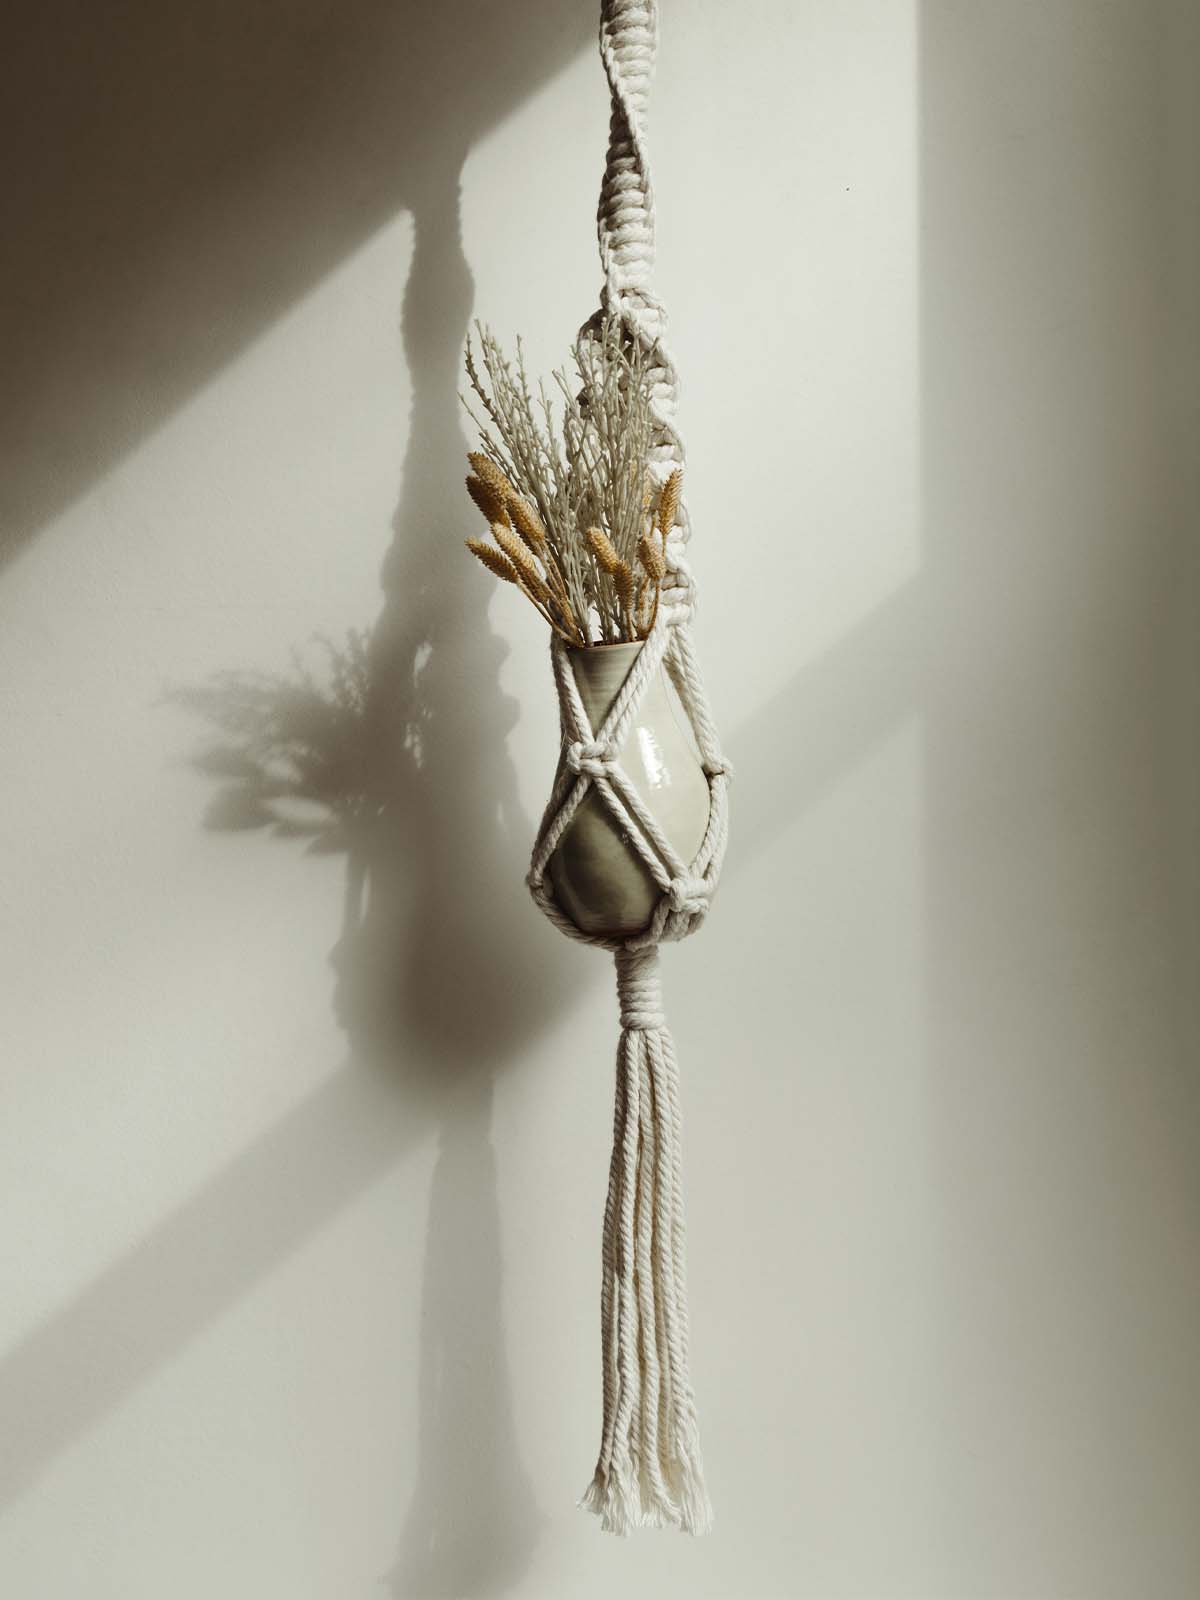 Macrame plant hanging holding vase and dried flowers against a white wall.